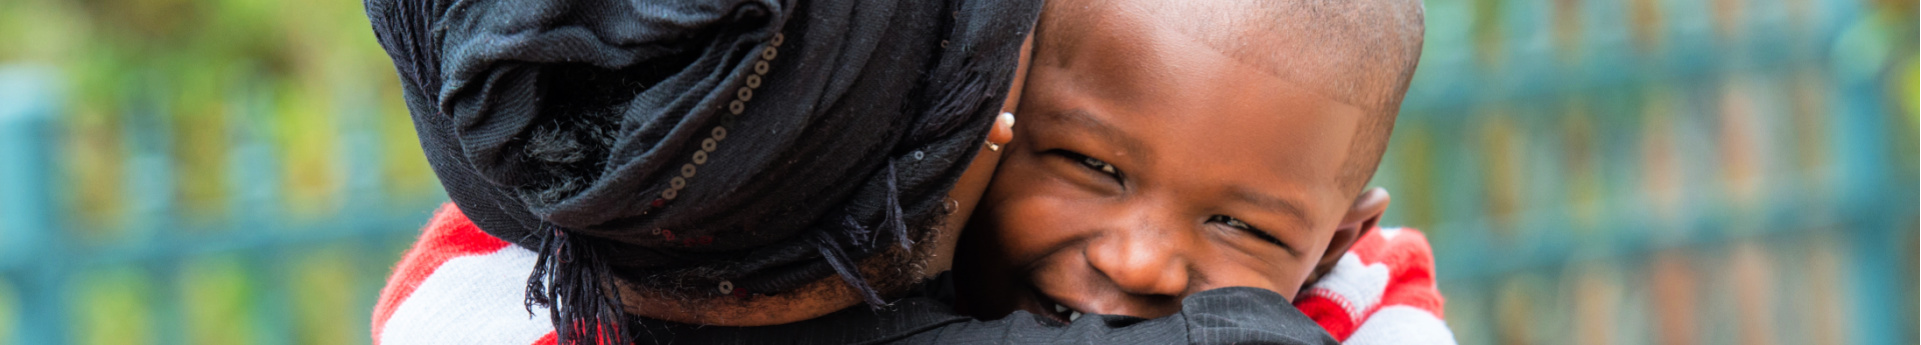 Woman from back hugging afro-Caribbean boy